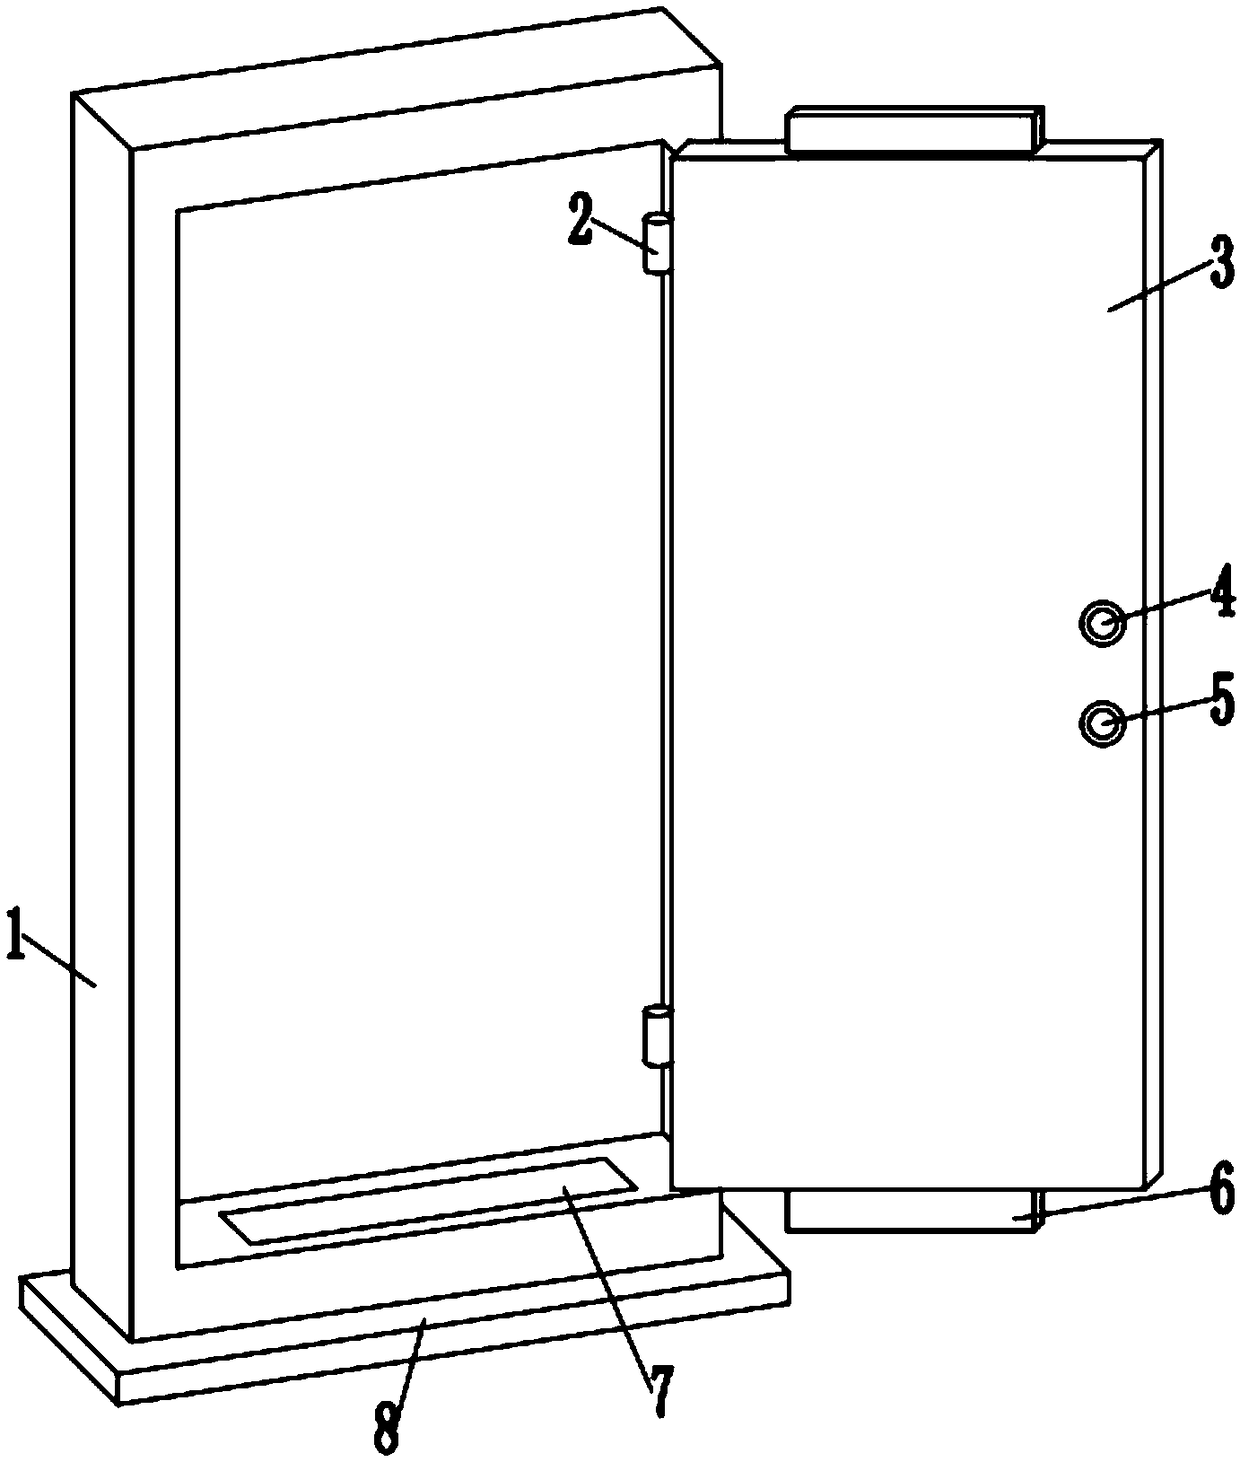 Anti-prying security door with high safety performance